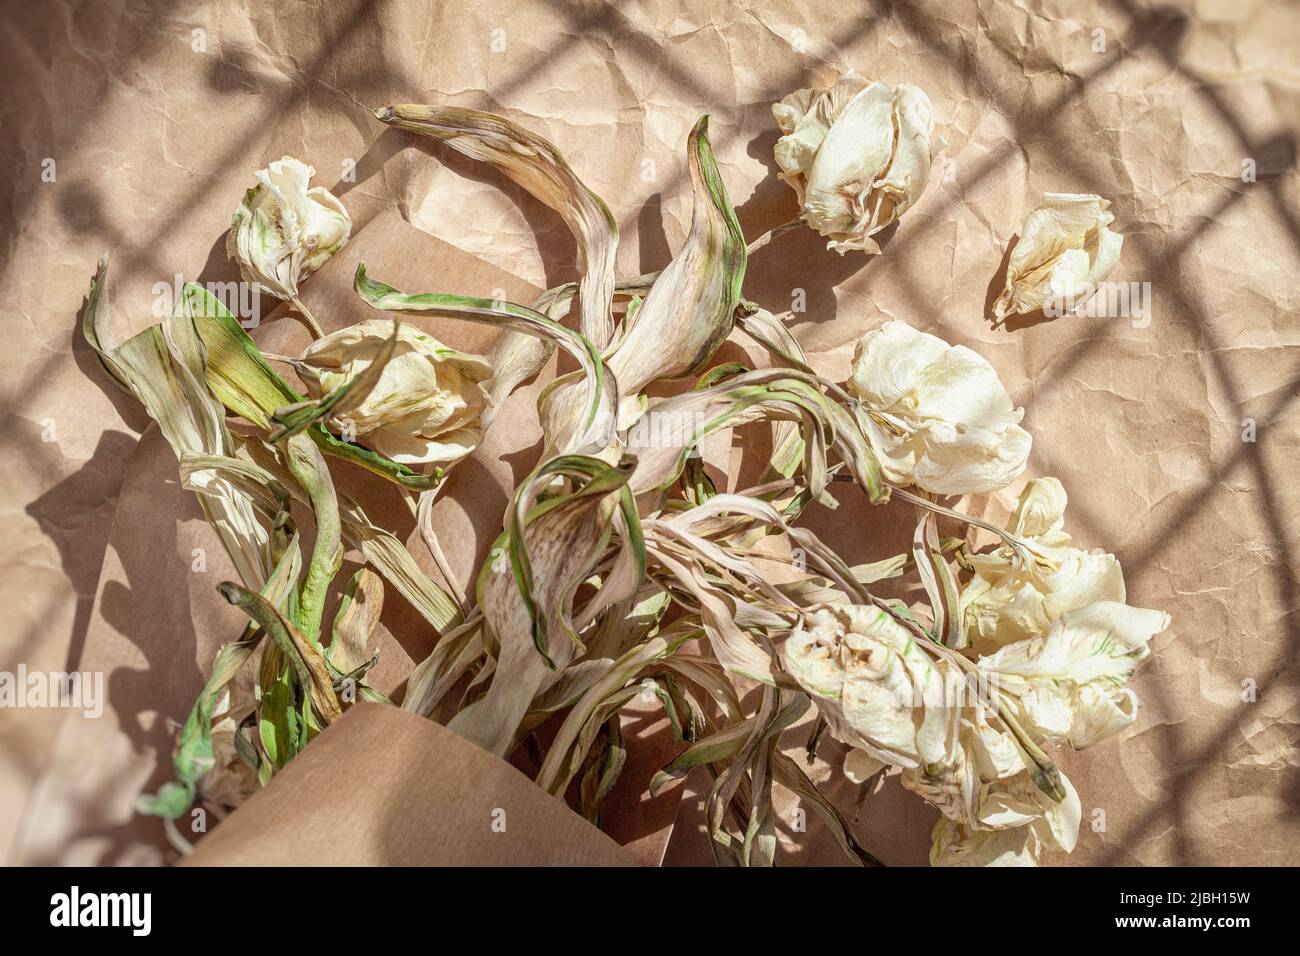 Light and shade. Fading bouquet of dried flowers on kraft paper close-up. Vintage style, concept of romantic sadness and nostalgia Stock Photo